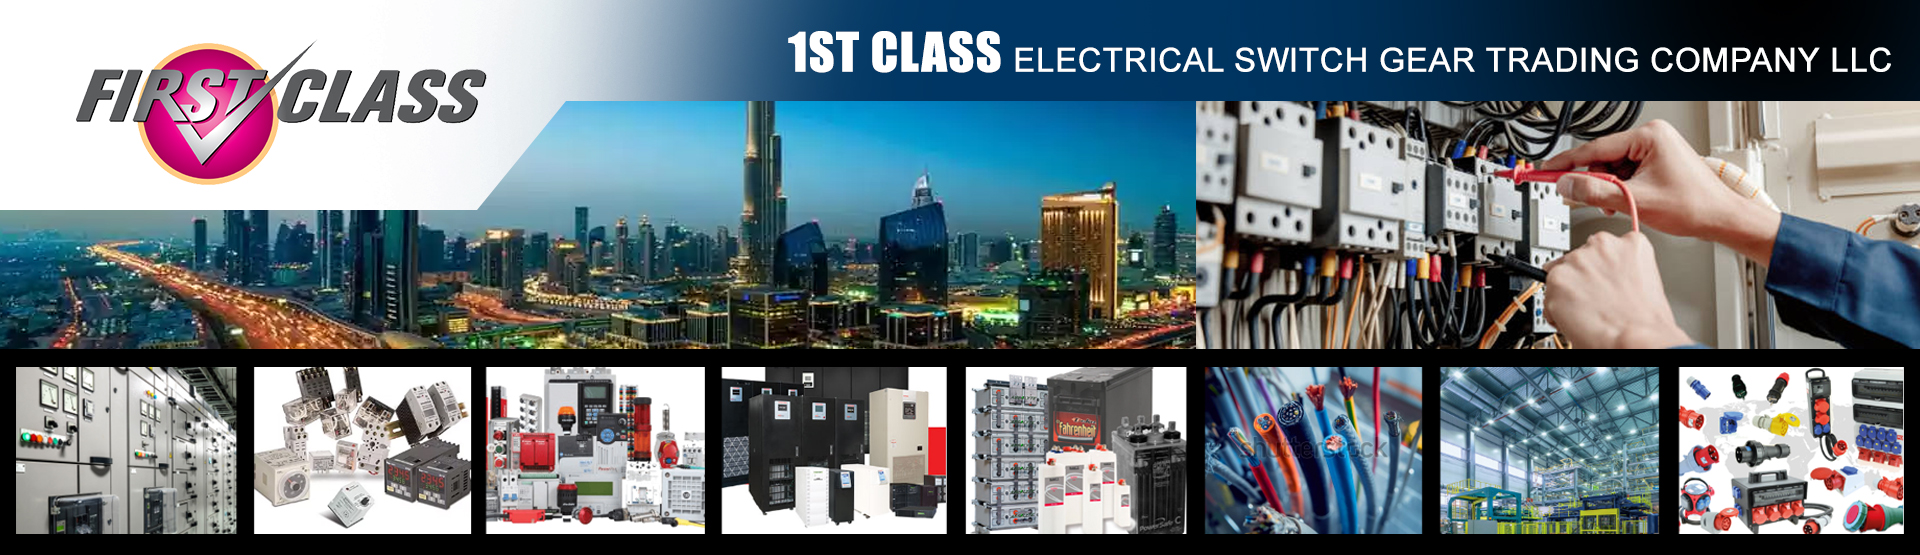 1ST CLASS ELECTRICAL SWITCH GEAR TRADING COMPANY LLC